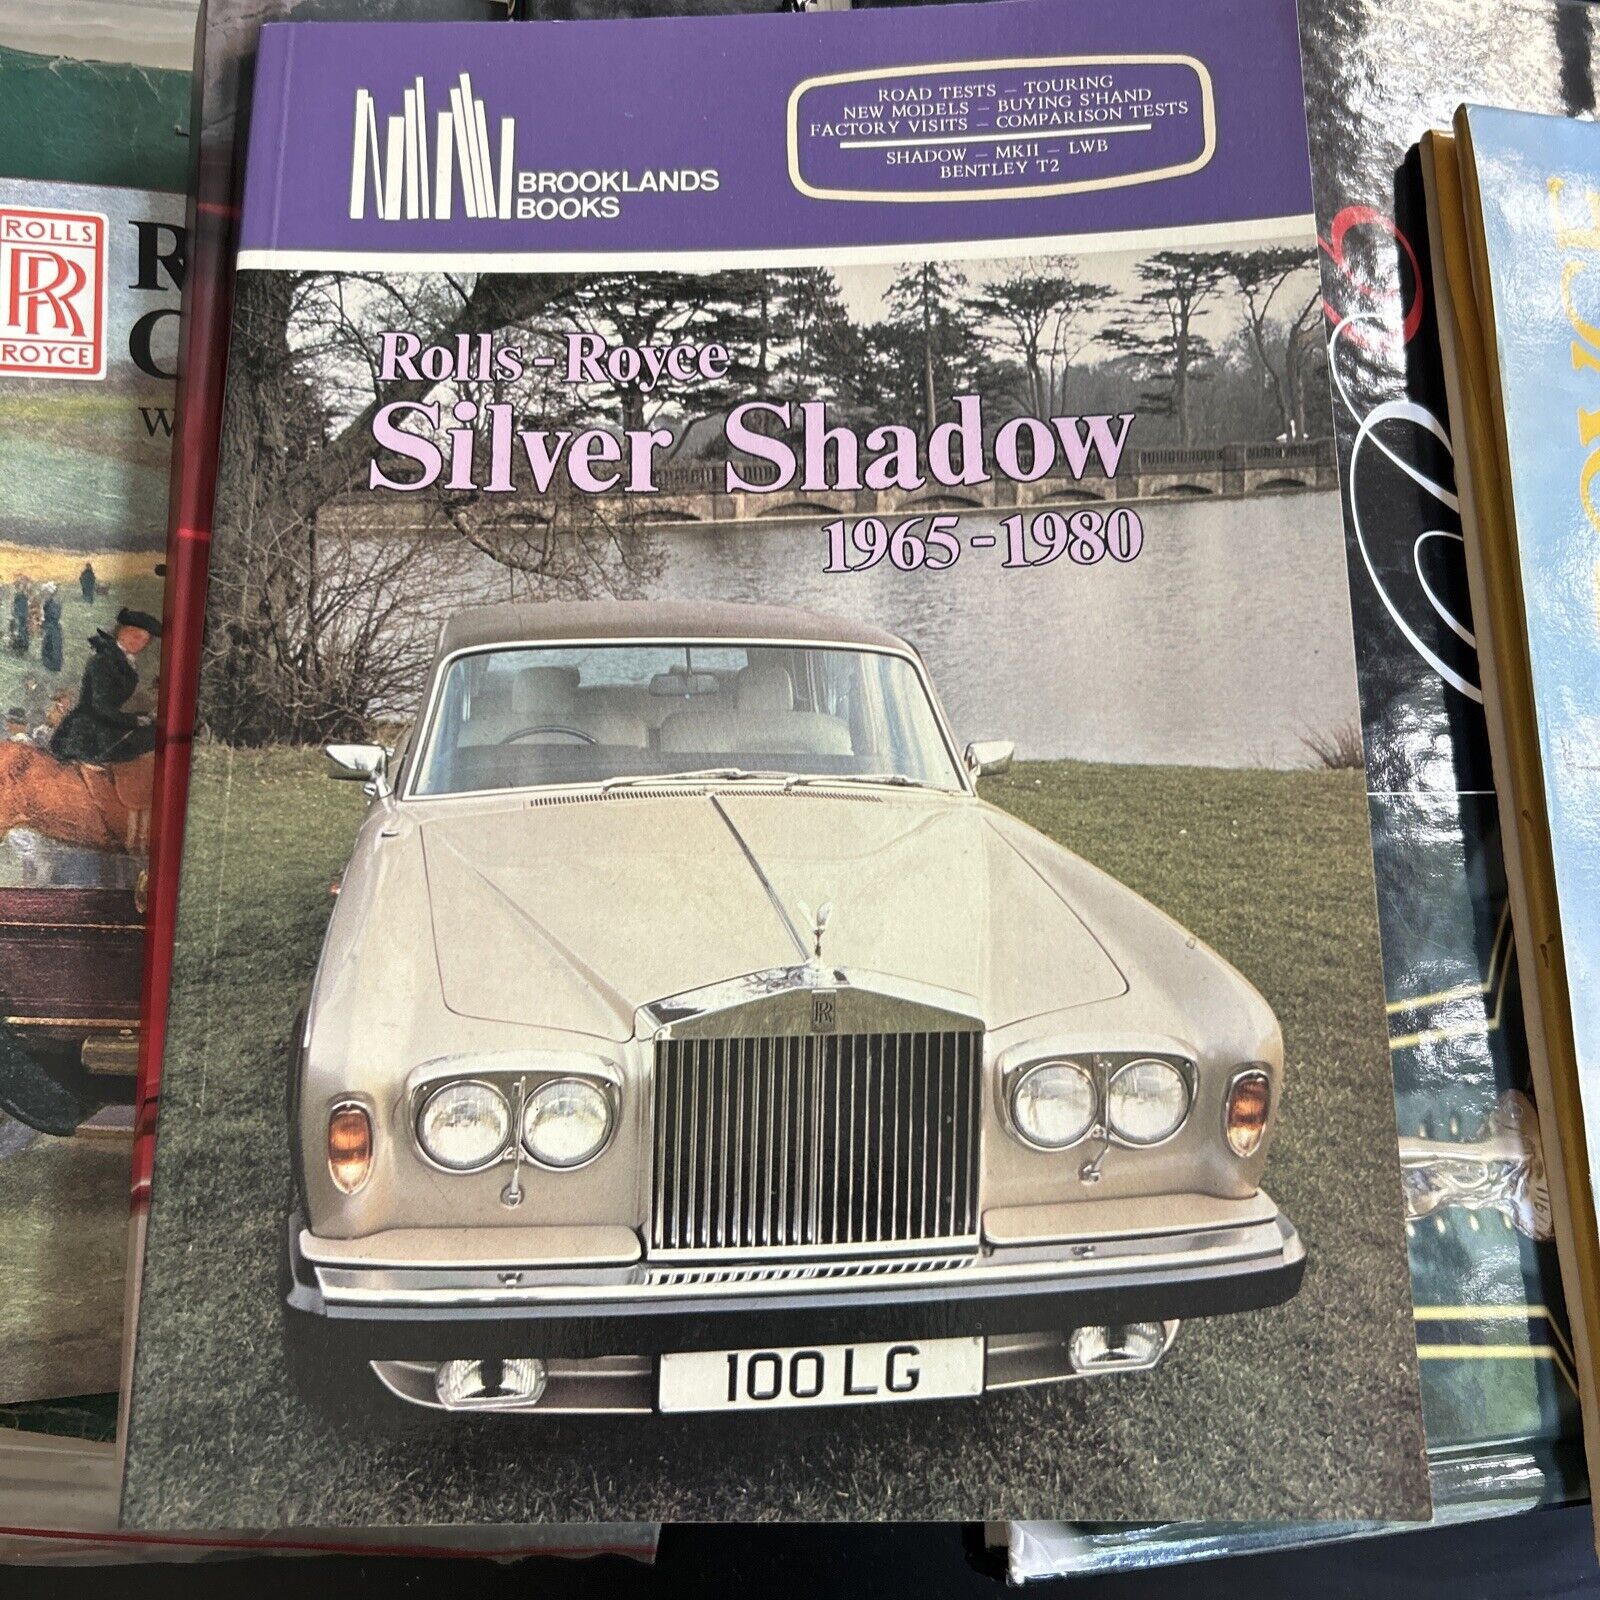 Rare Vintage Rolls-Royce Silver Shadow 1965-1980 Chronology by Brookland Books